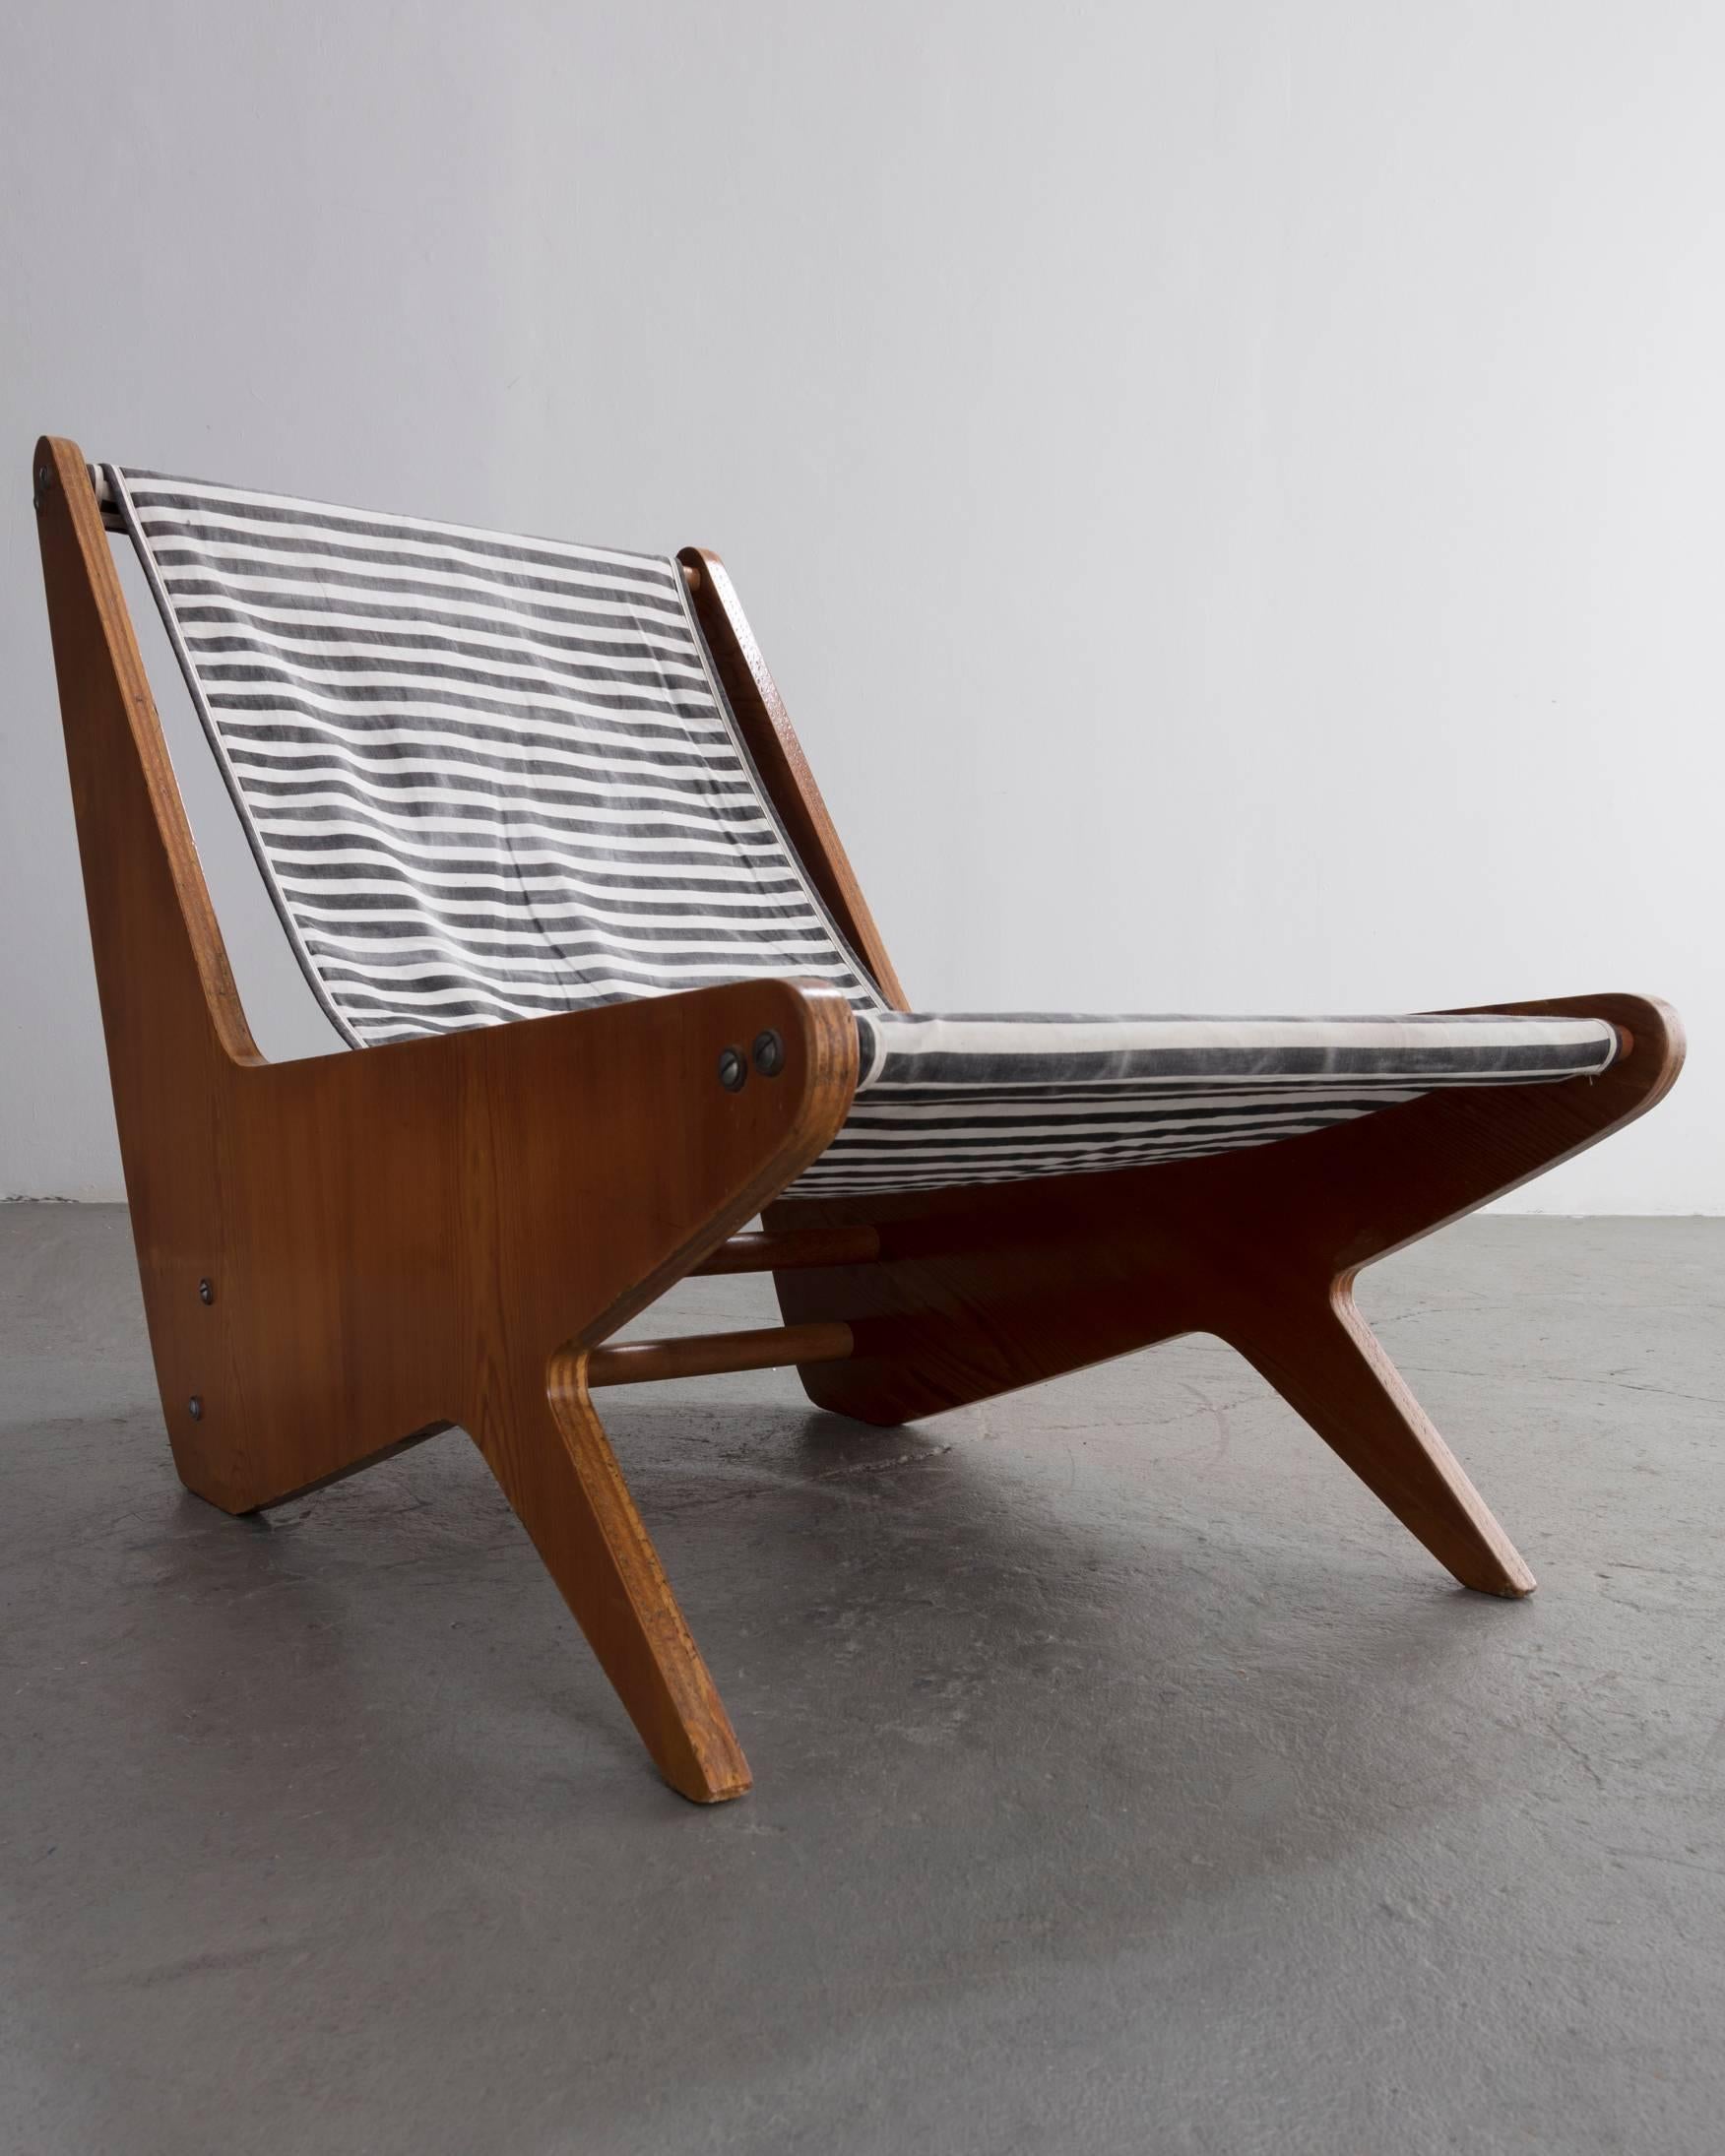 Early plywood lounge chair with black and white striped slung canvas seat. Designed by Jose Zanine, Brazil, 1950s.